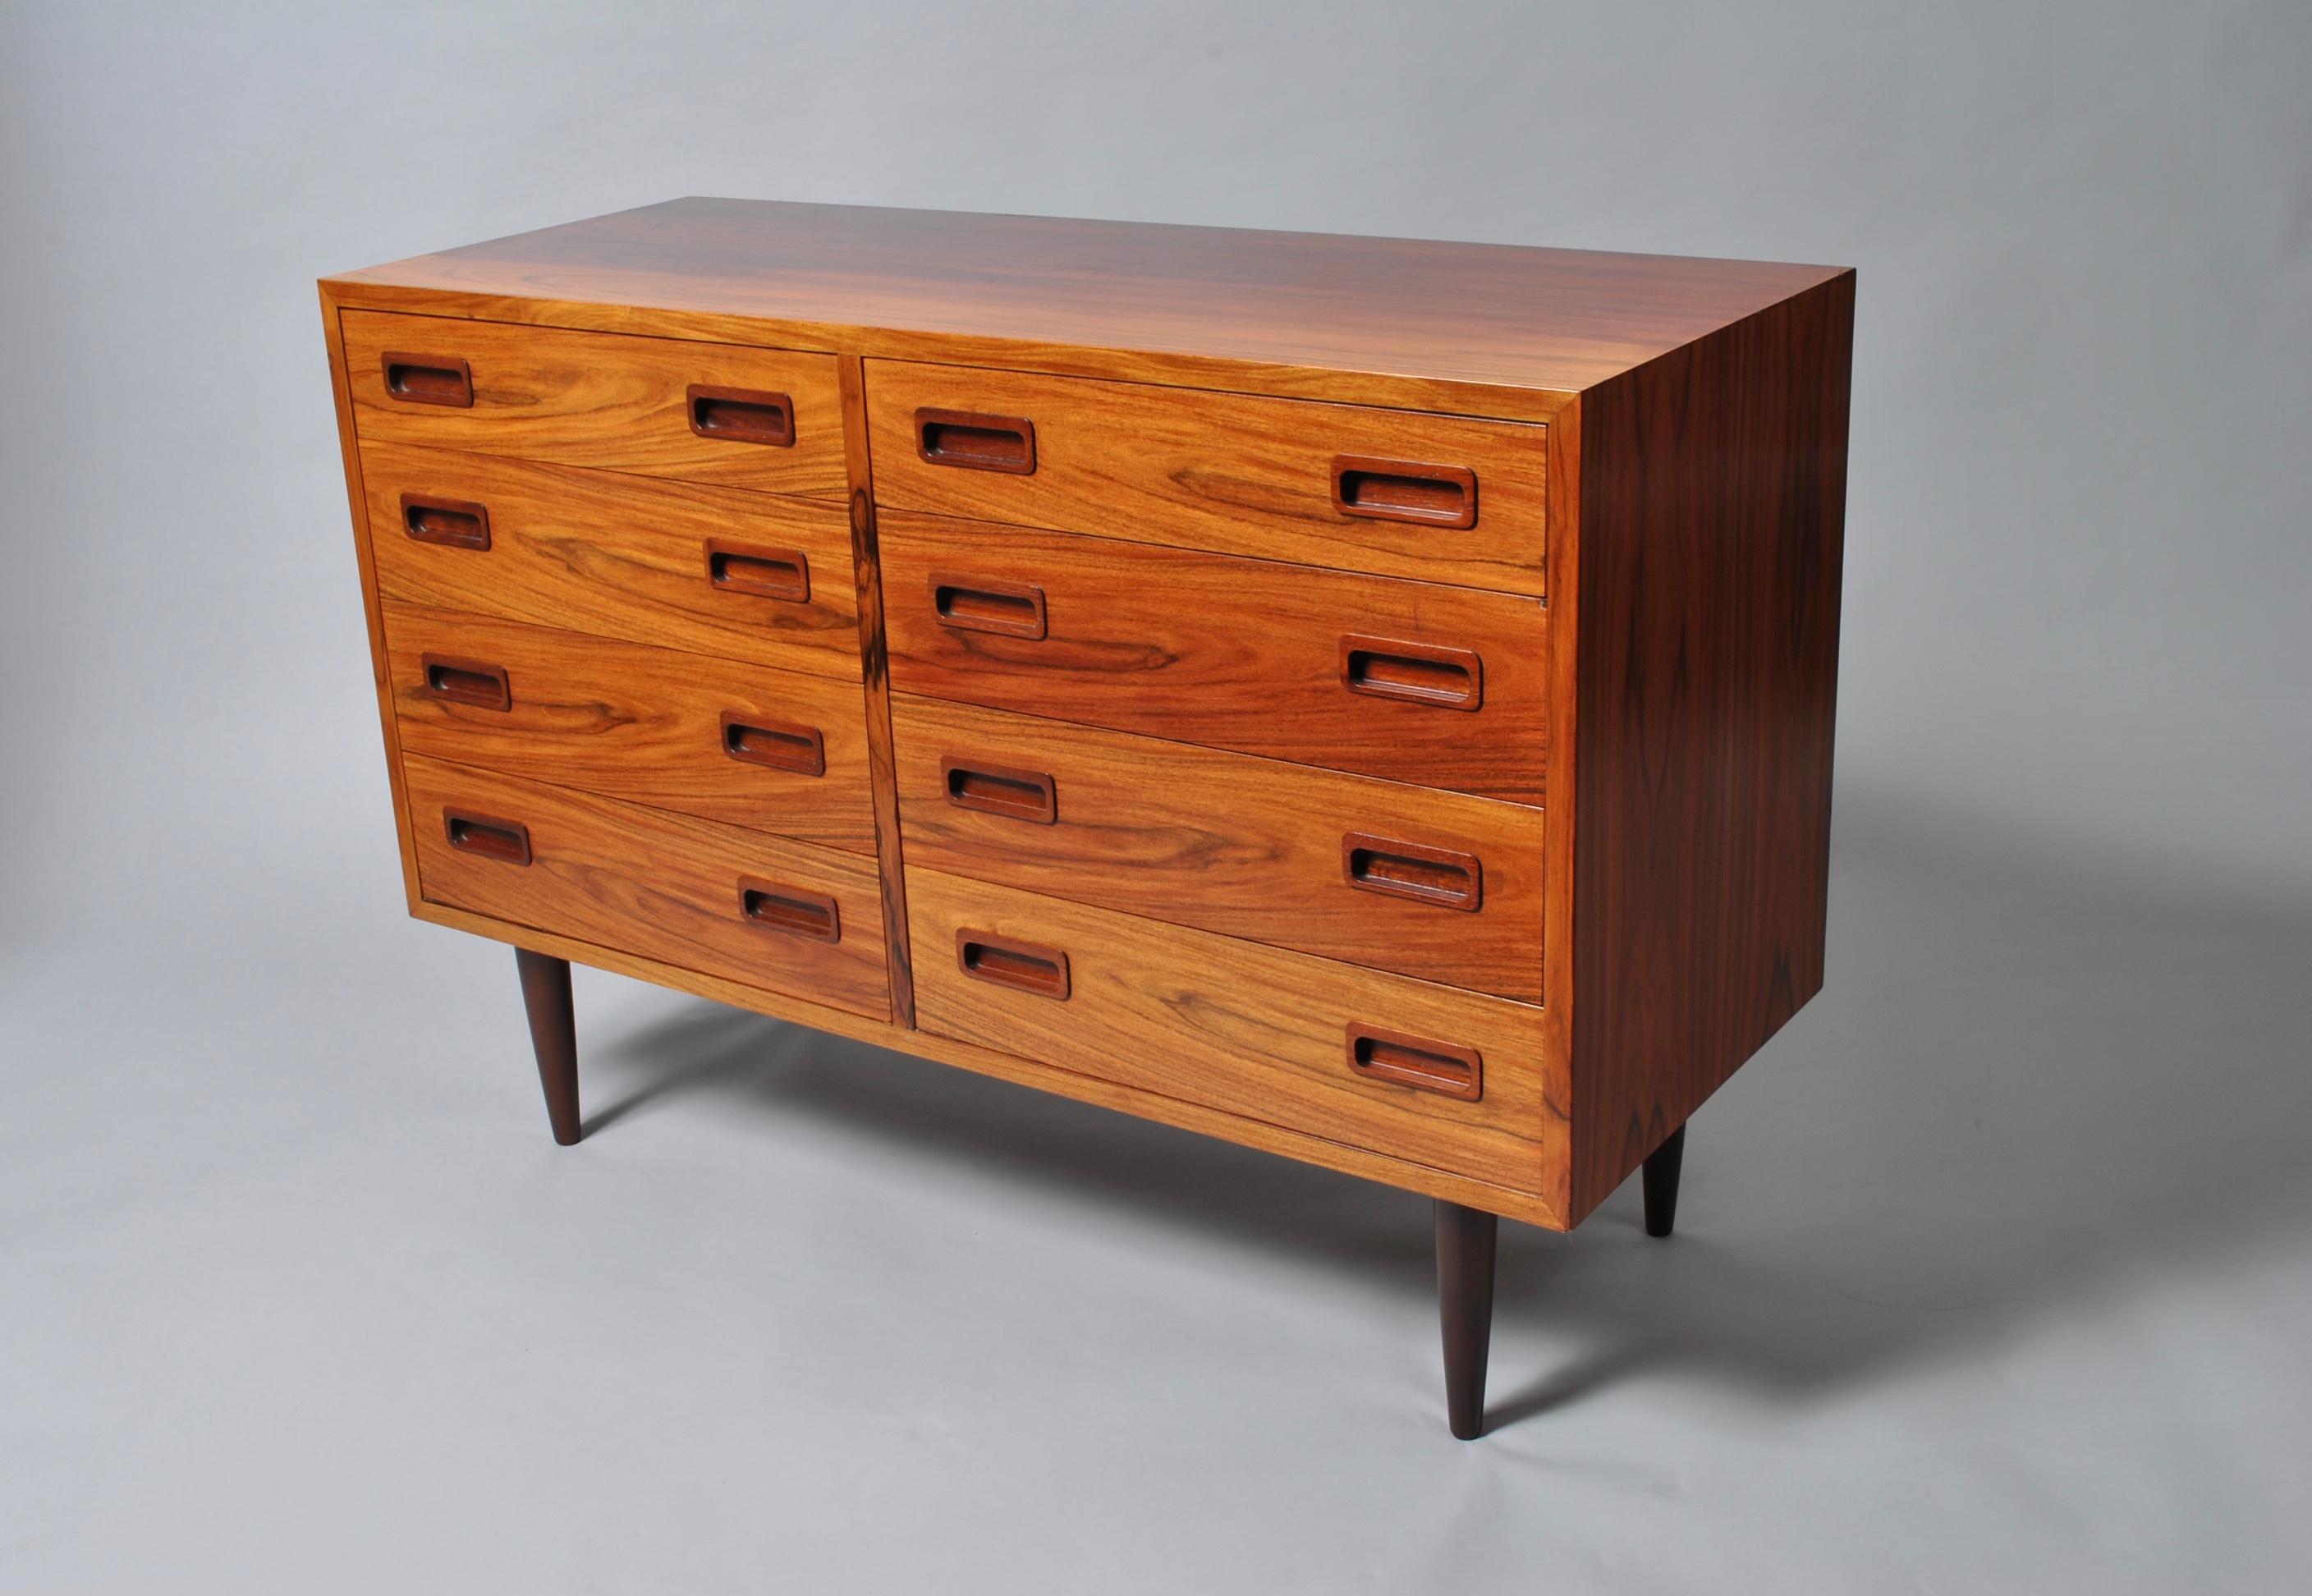 A practically sized double bank chest of drawers by Poul Hundevad, Denmark circa 1960.
Classic midcentury Danish piece of furniture.
 